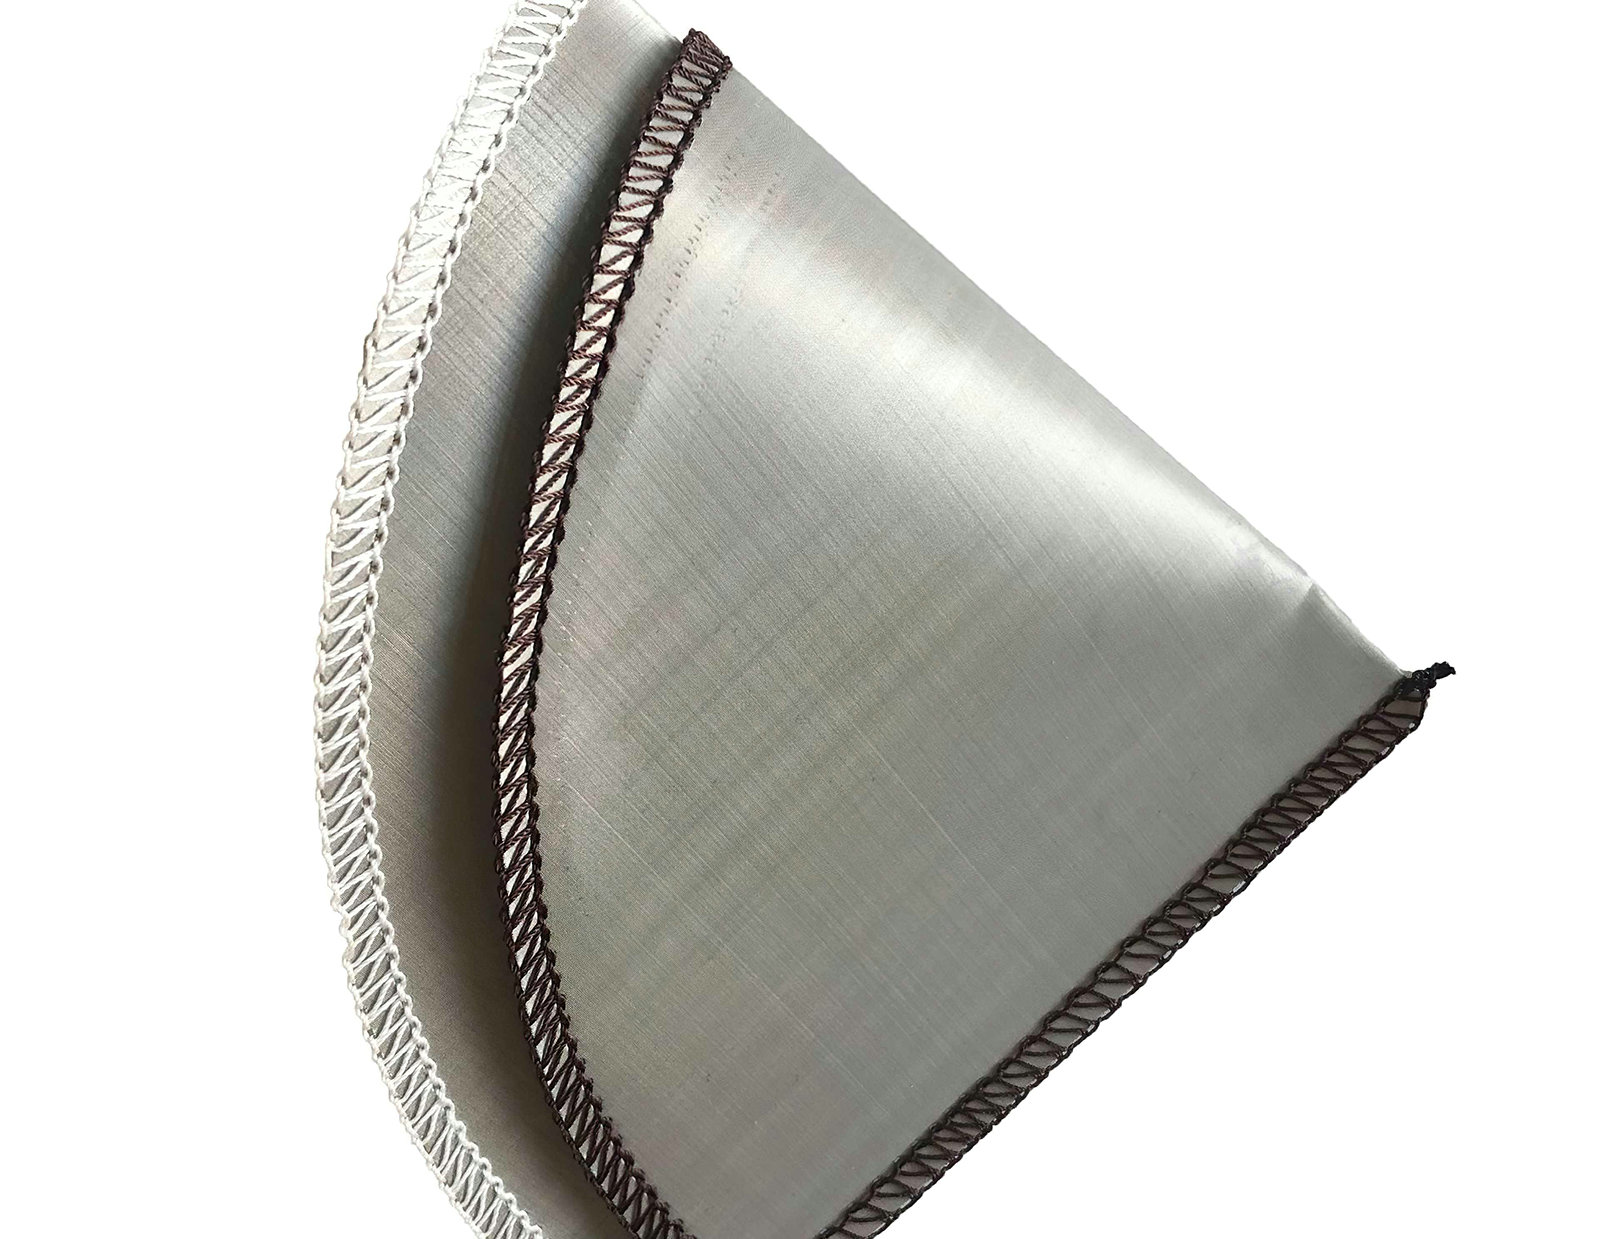 The characteristics of stainless steel wire mesh filter bag